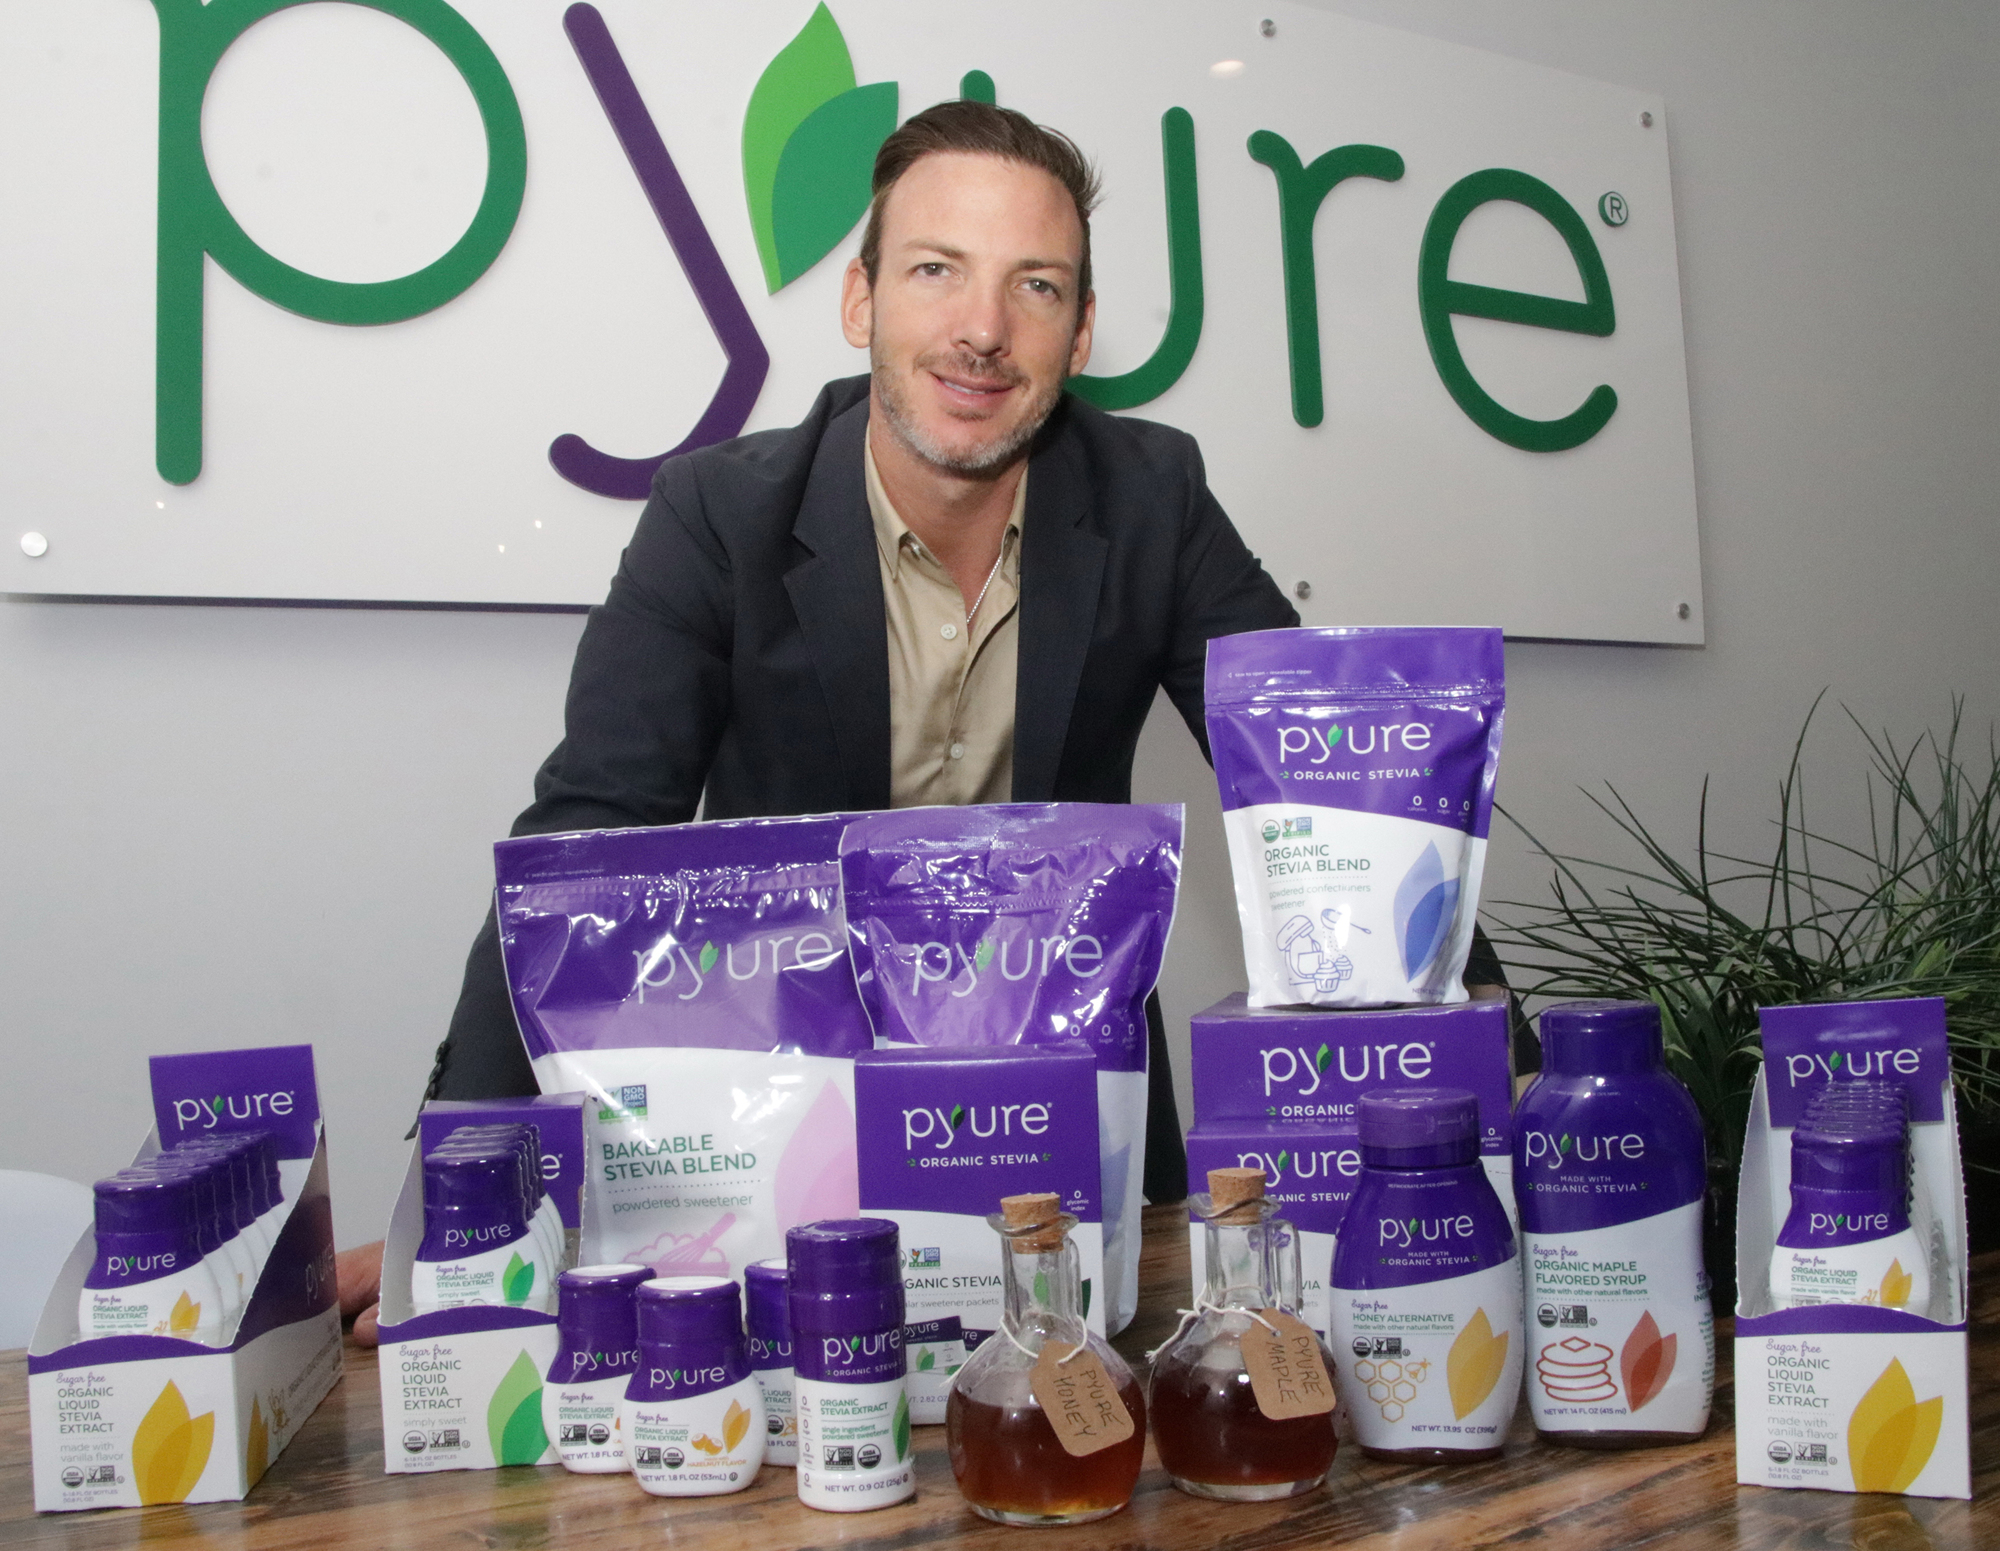 Benjamin Fleischer's Pyure Brands has developed several stevia products from granular sweetener to maple-flavor syrup.